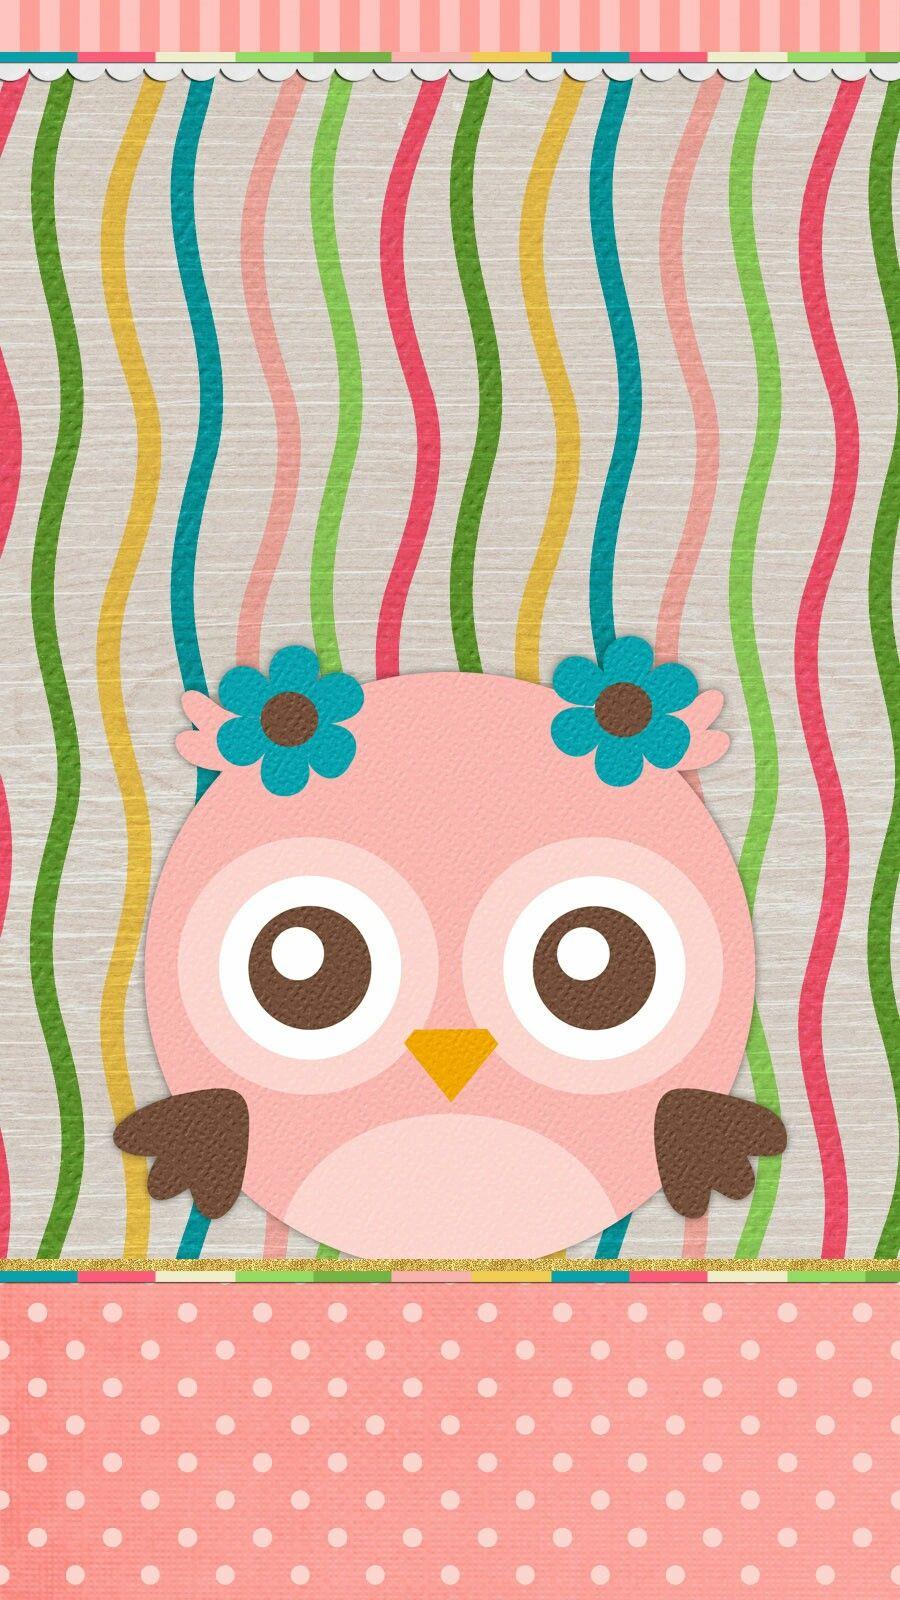 spring #owls #wallpaper #iphone. Cute walls by me♡